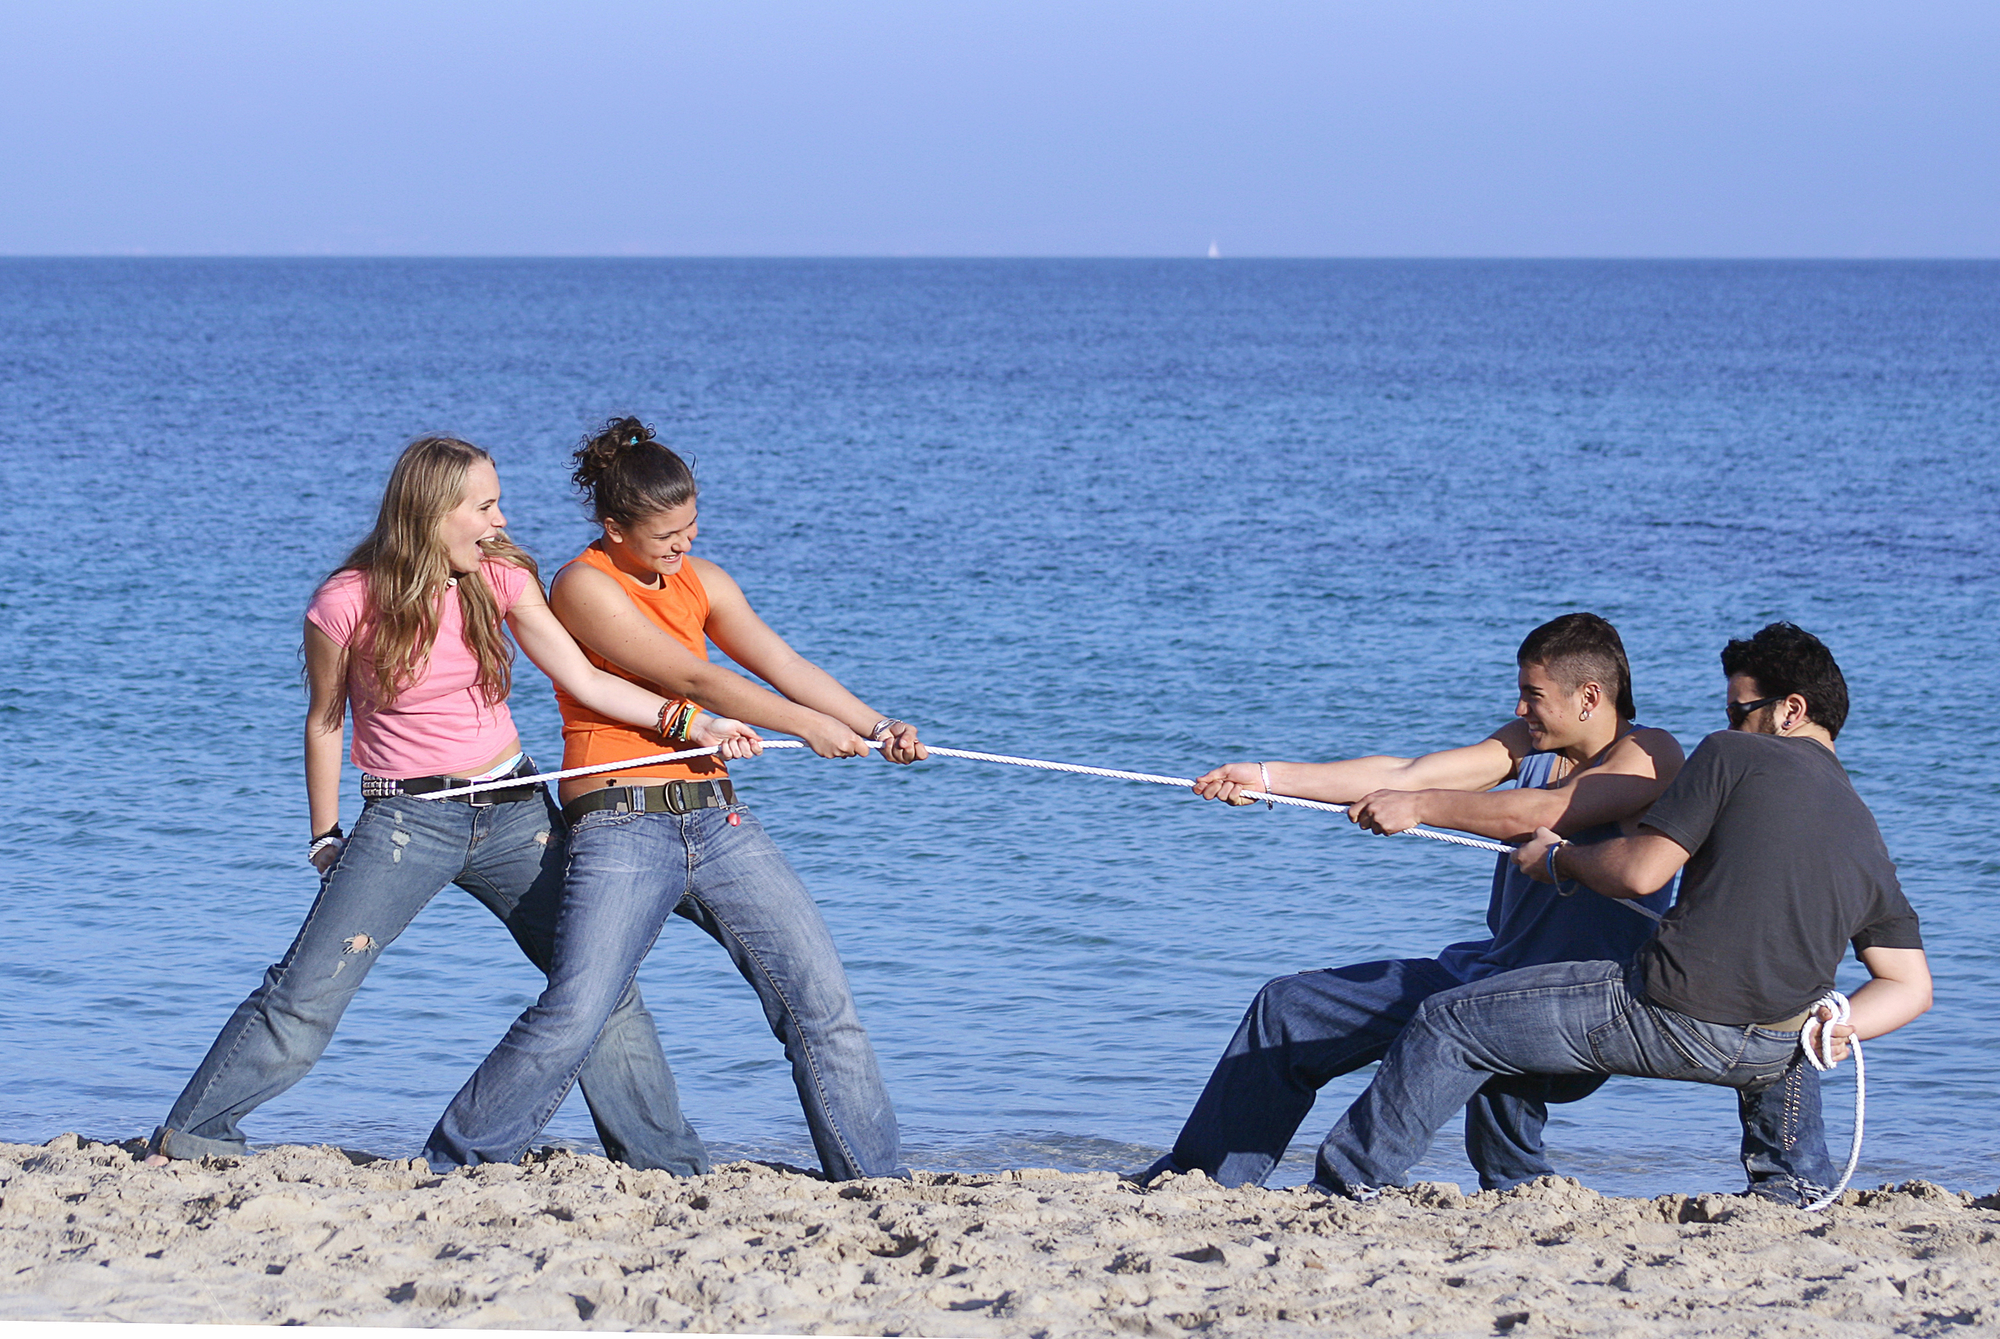 tug of war, teens playing on beach on summer vacation or spring break